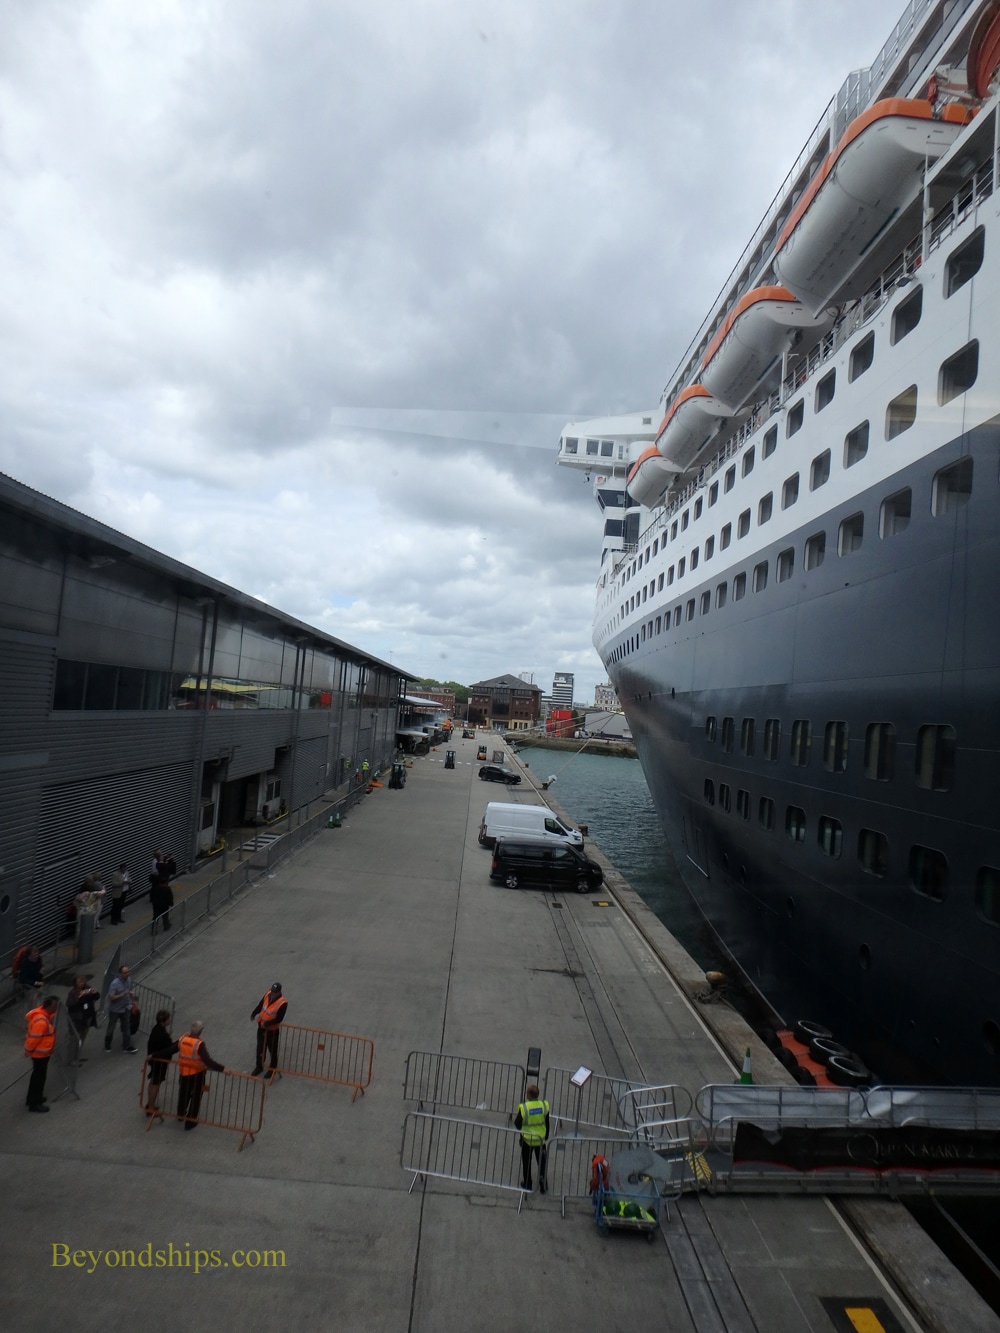 Queen Mary 2 preparing to sail